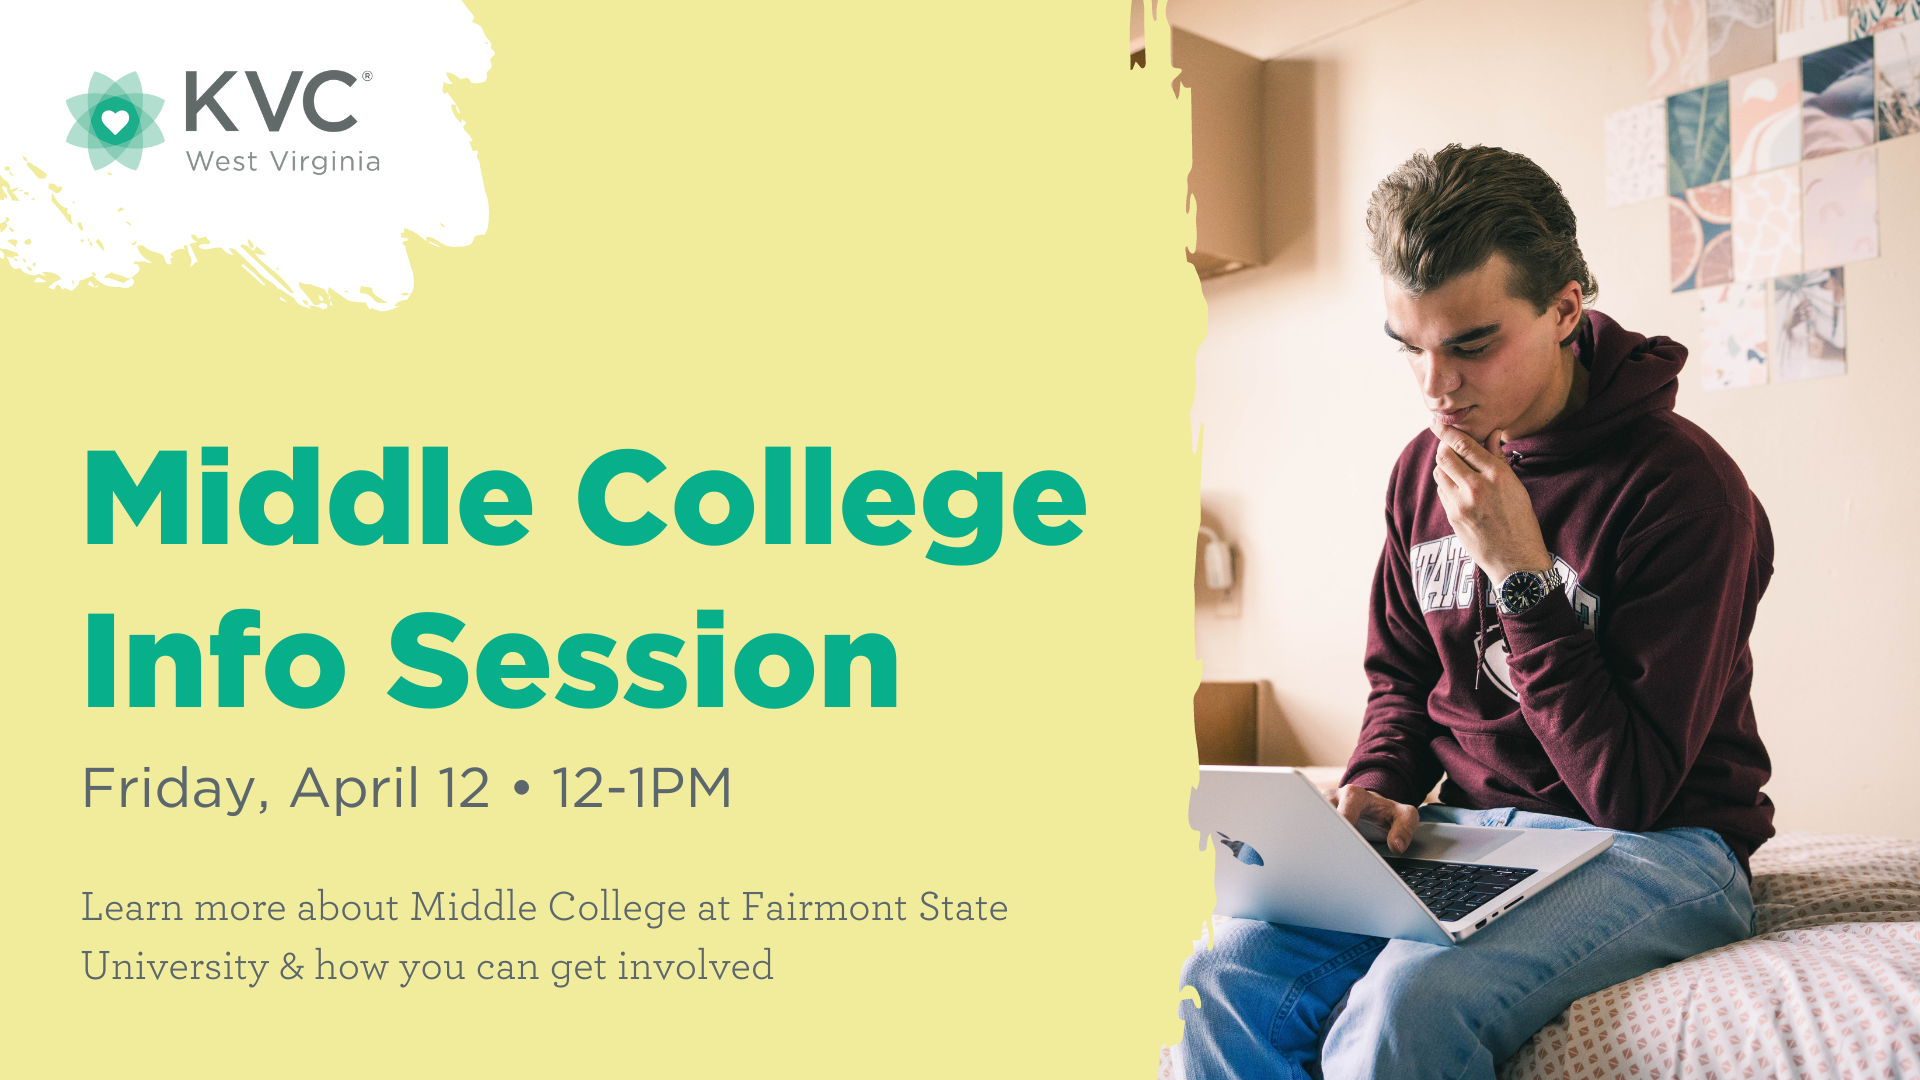 Middle College at Fairmont State University Info Session hosted by KVC West Virginia